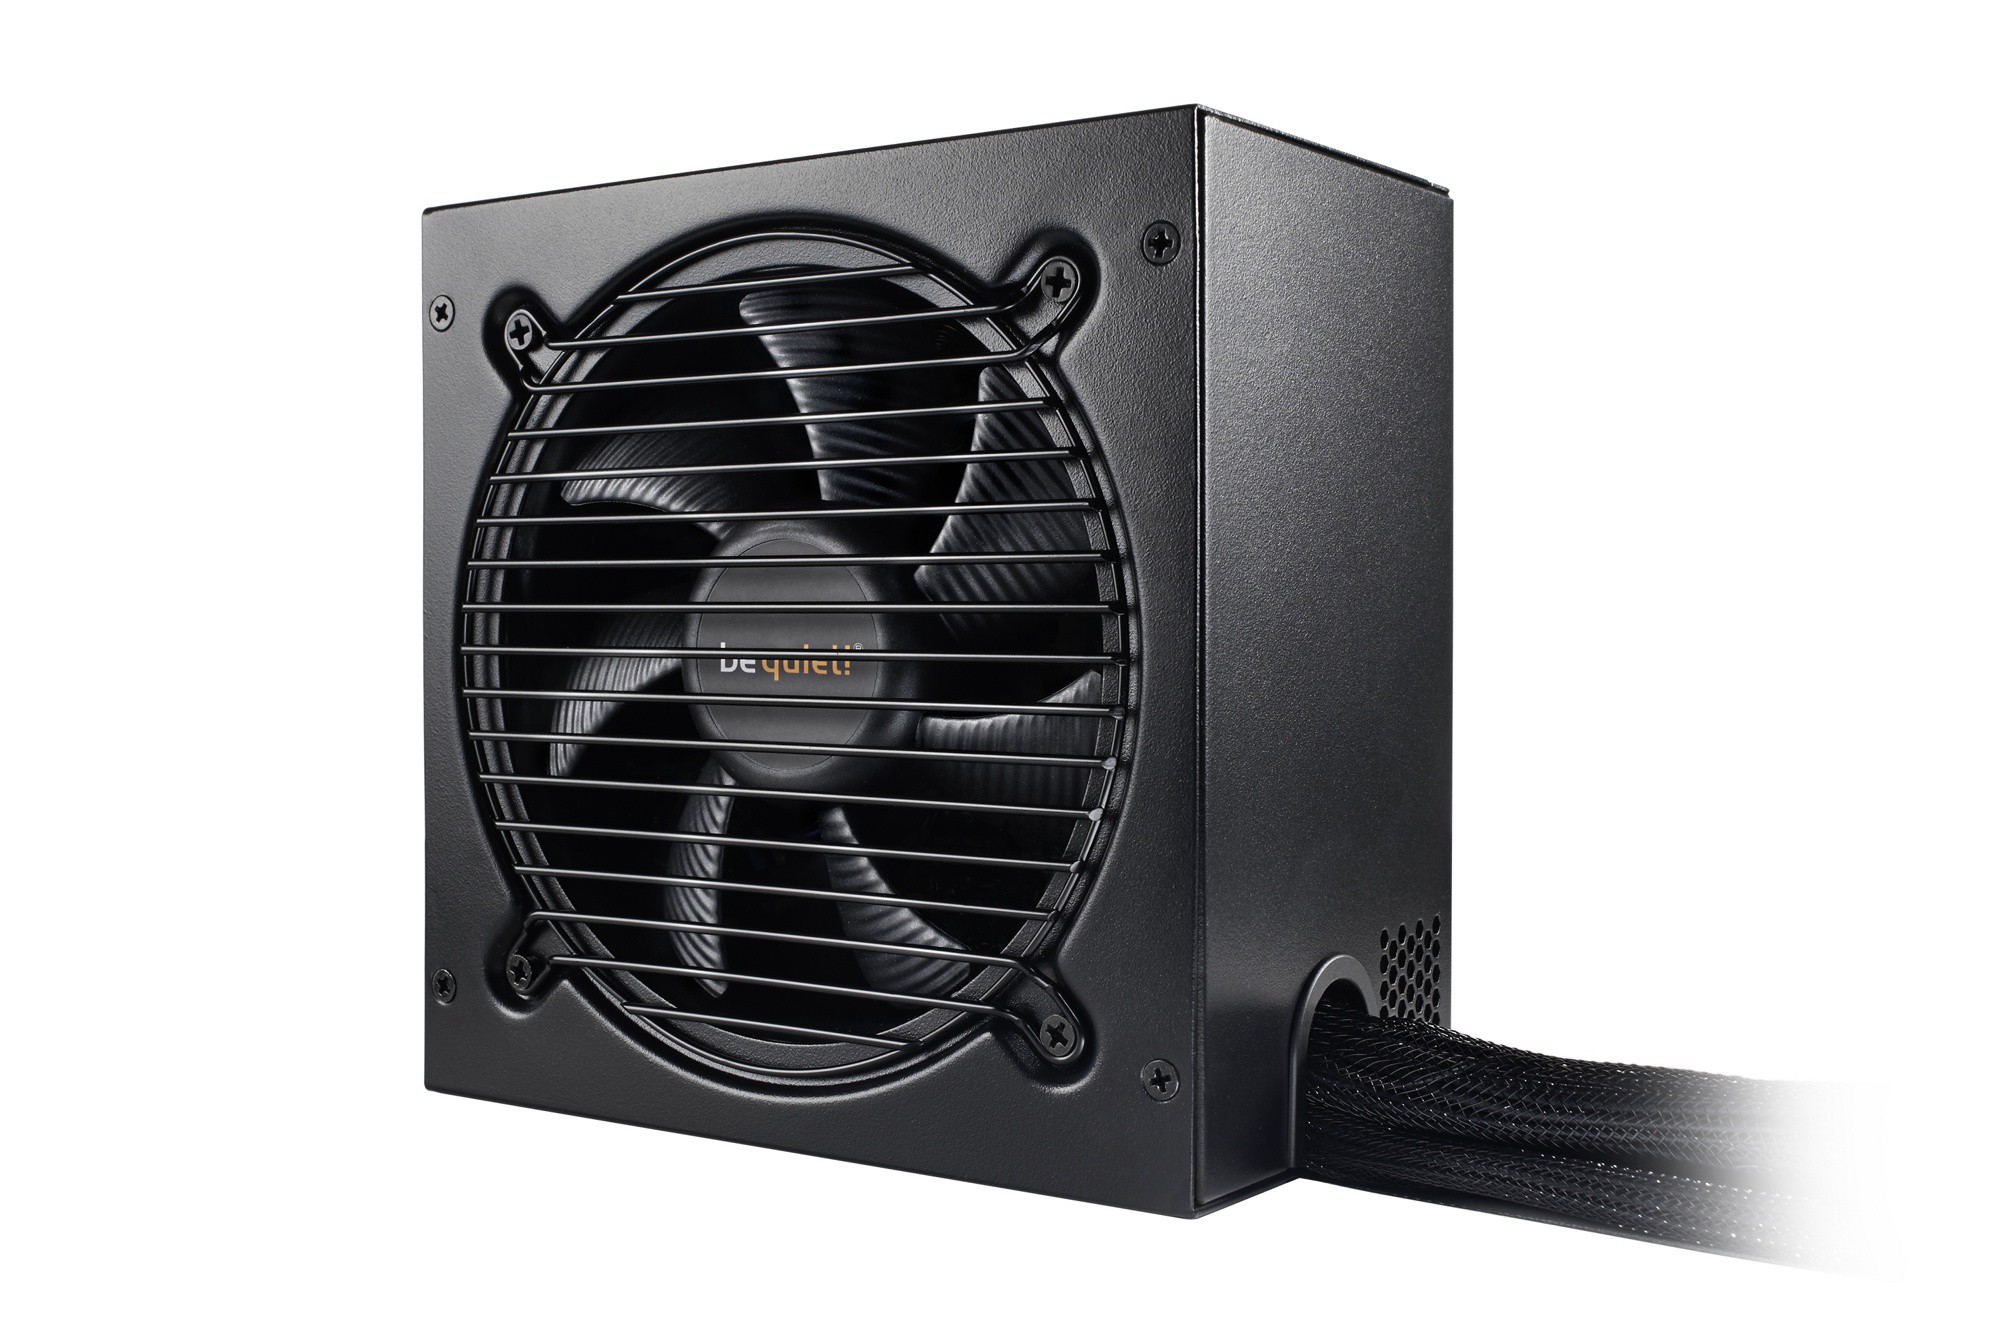   500W be quiet! Pure Power 11 (BN293)